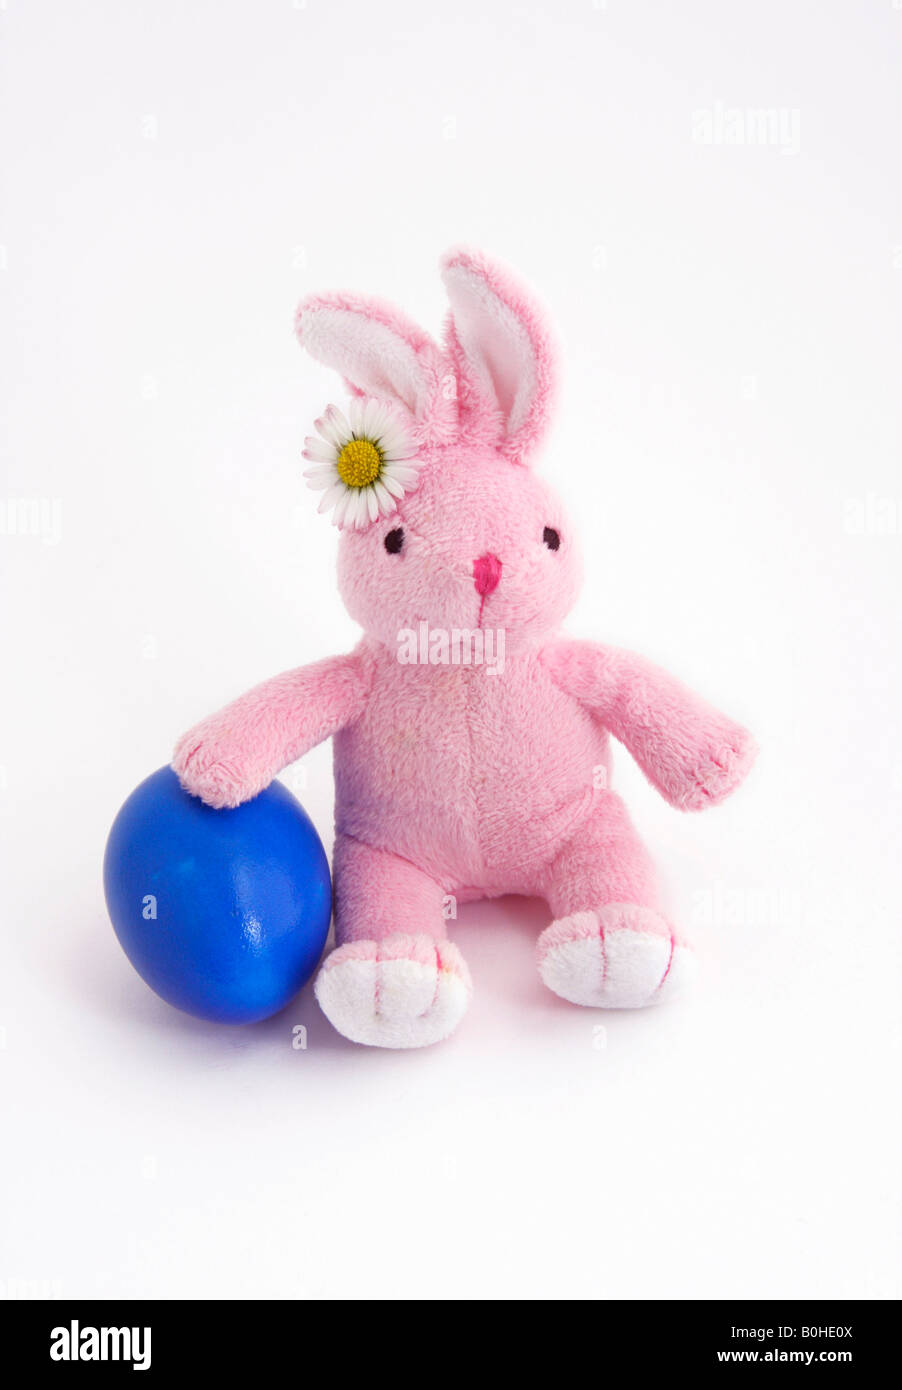 Easter bunny with a daisy and a blue painted Easter egg Stock Photo